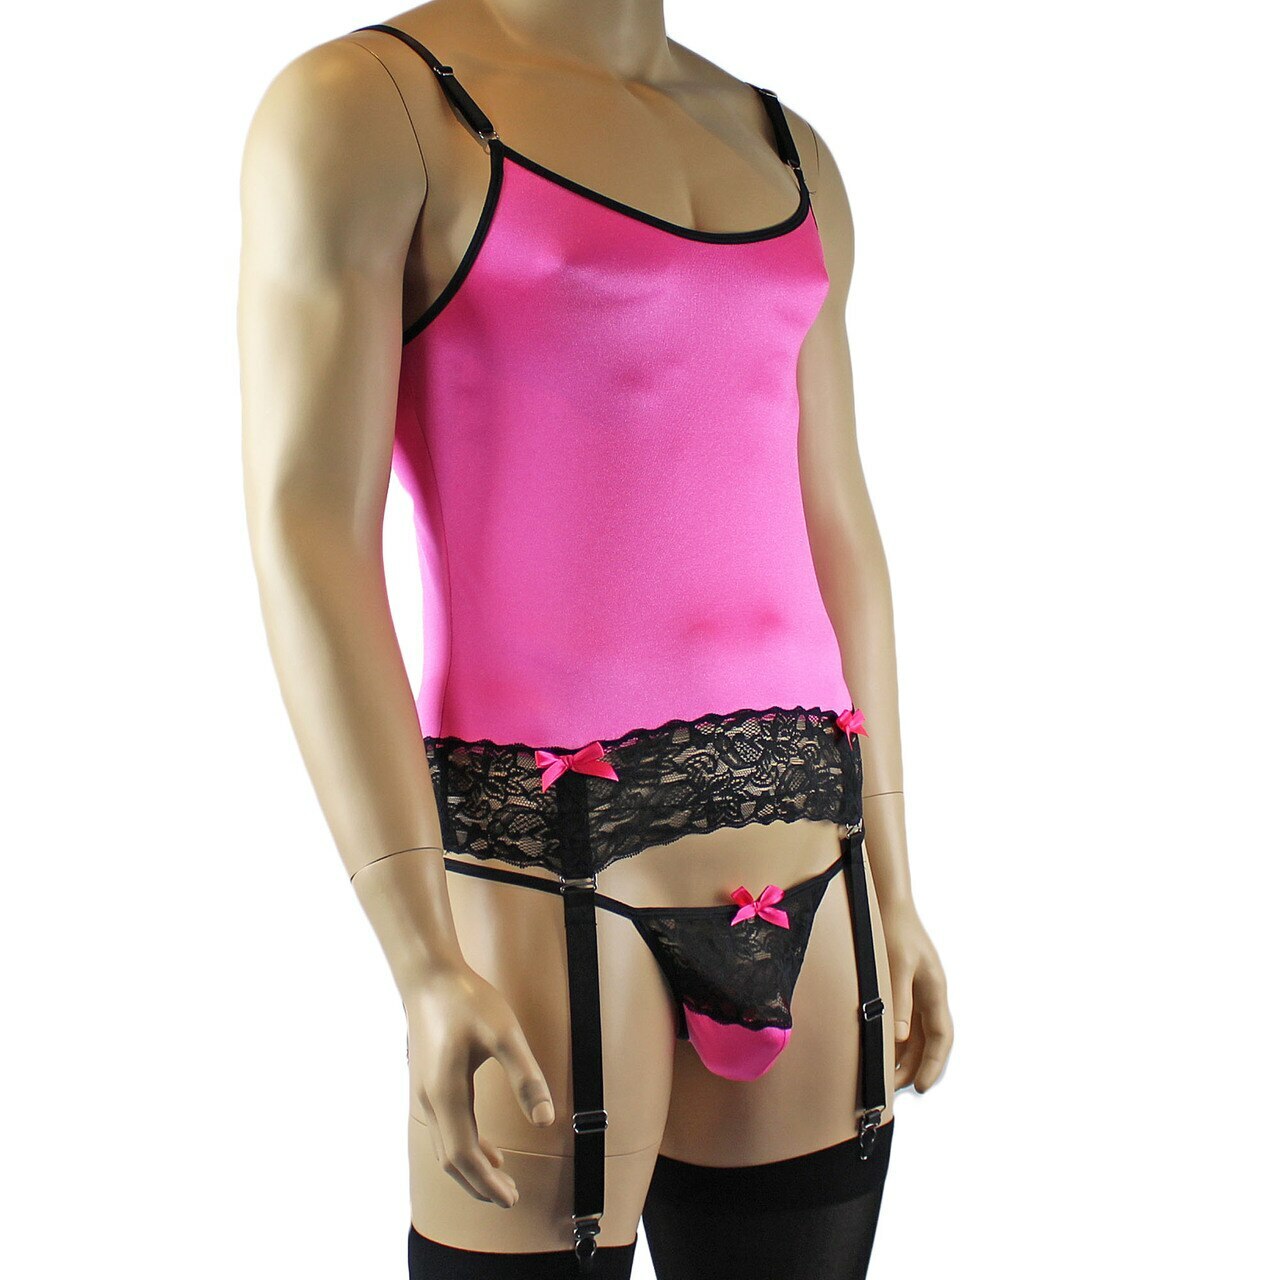 Mens Joanne Camisole Bustier Garter Top with Pouch G string & Stockings - Sizes up to 3XL Hot Pink and Black Lace